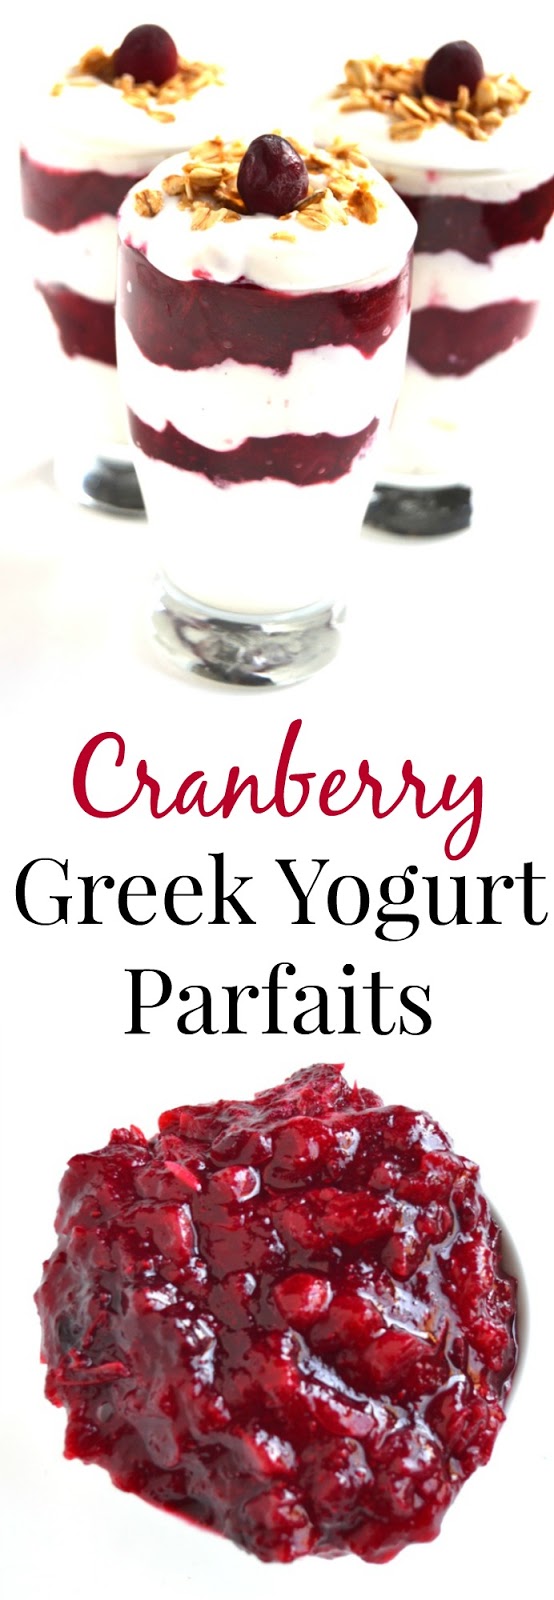  Cranberry Greek Yogurt Parfaits are full of flavor with fresh cranberry sauce, protein-packed Greek yogurt and crunchy granola for the perfect breakfast! www.nutritionistreviews.com